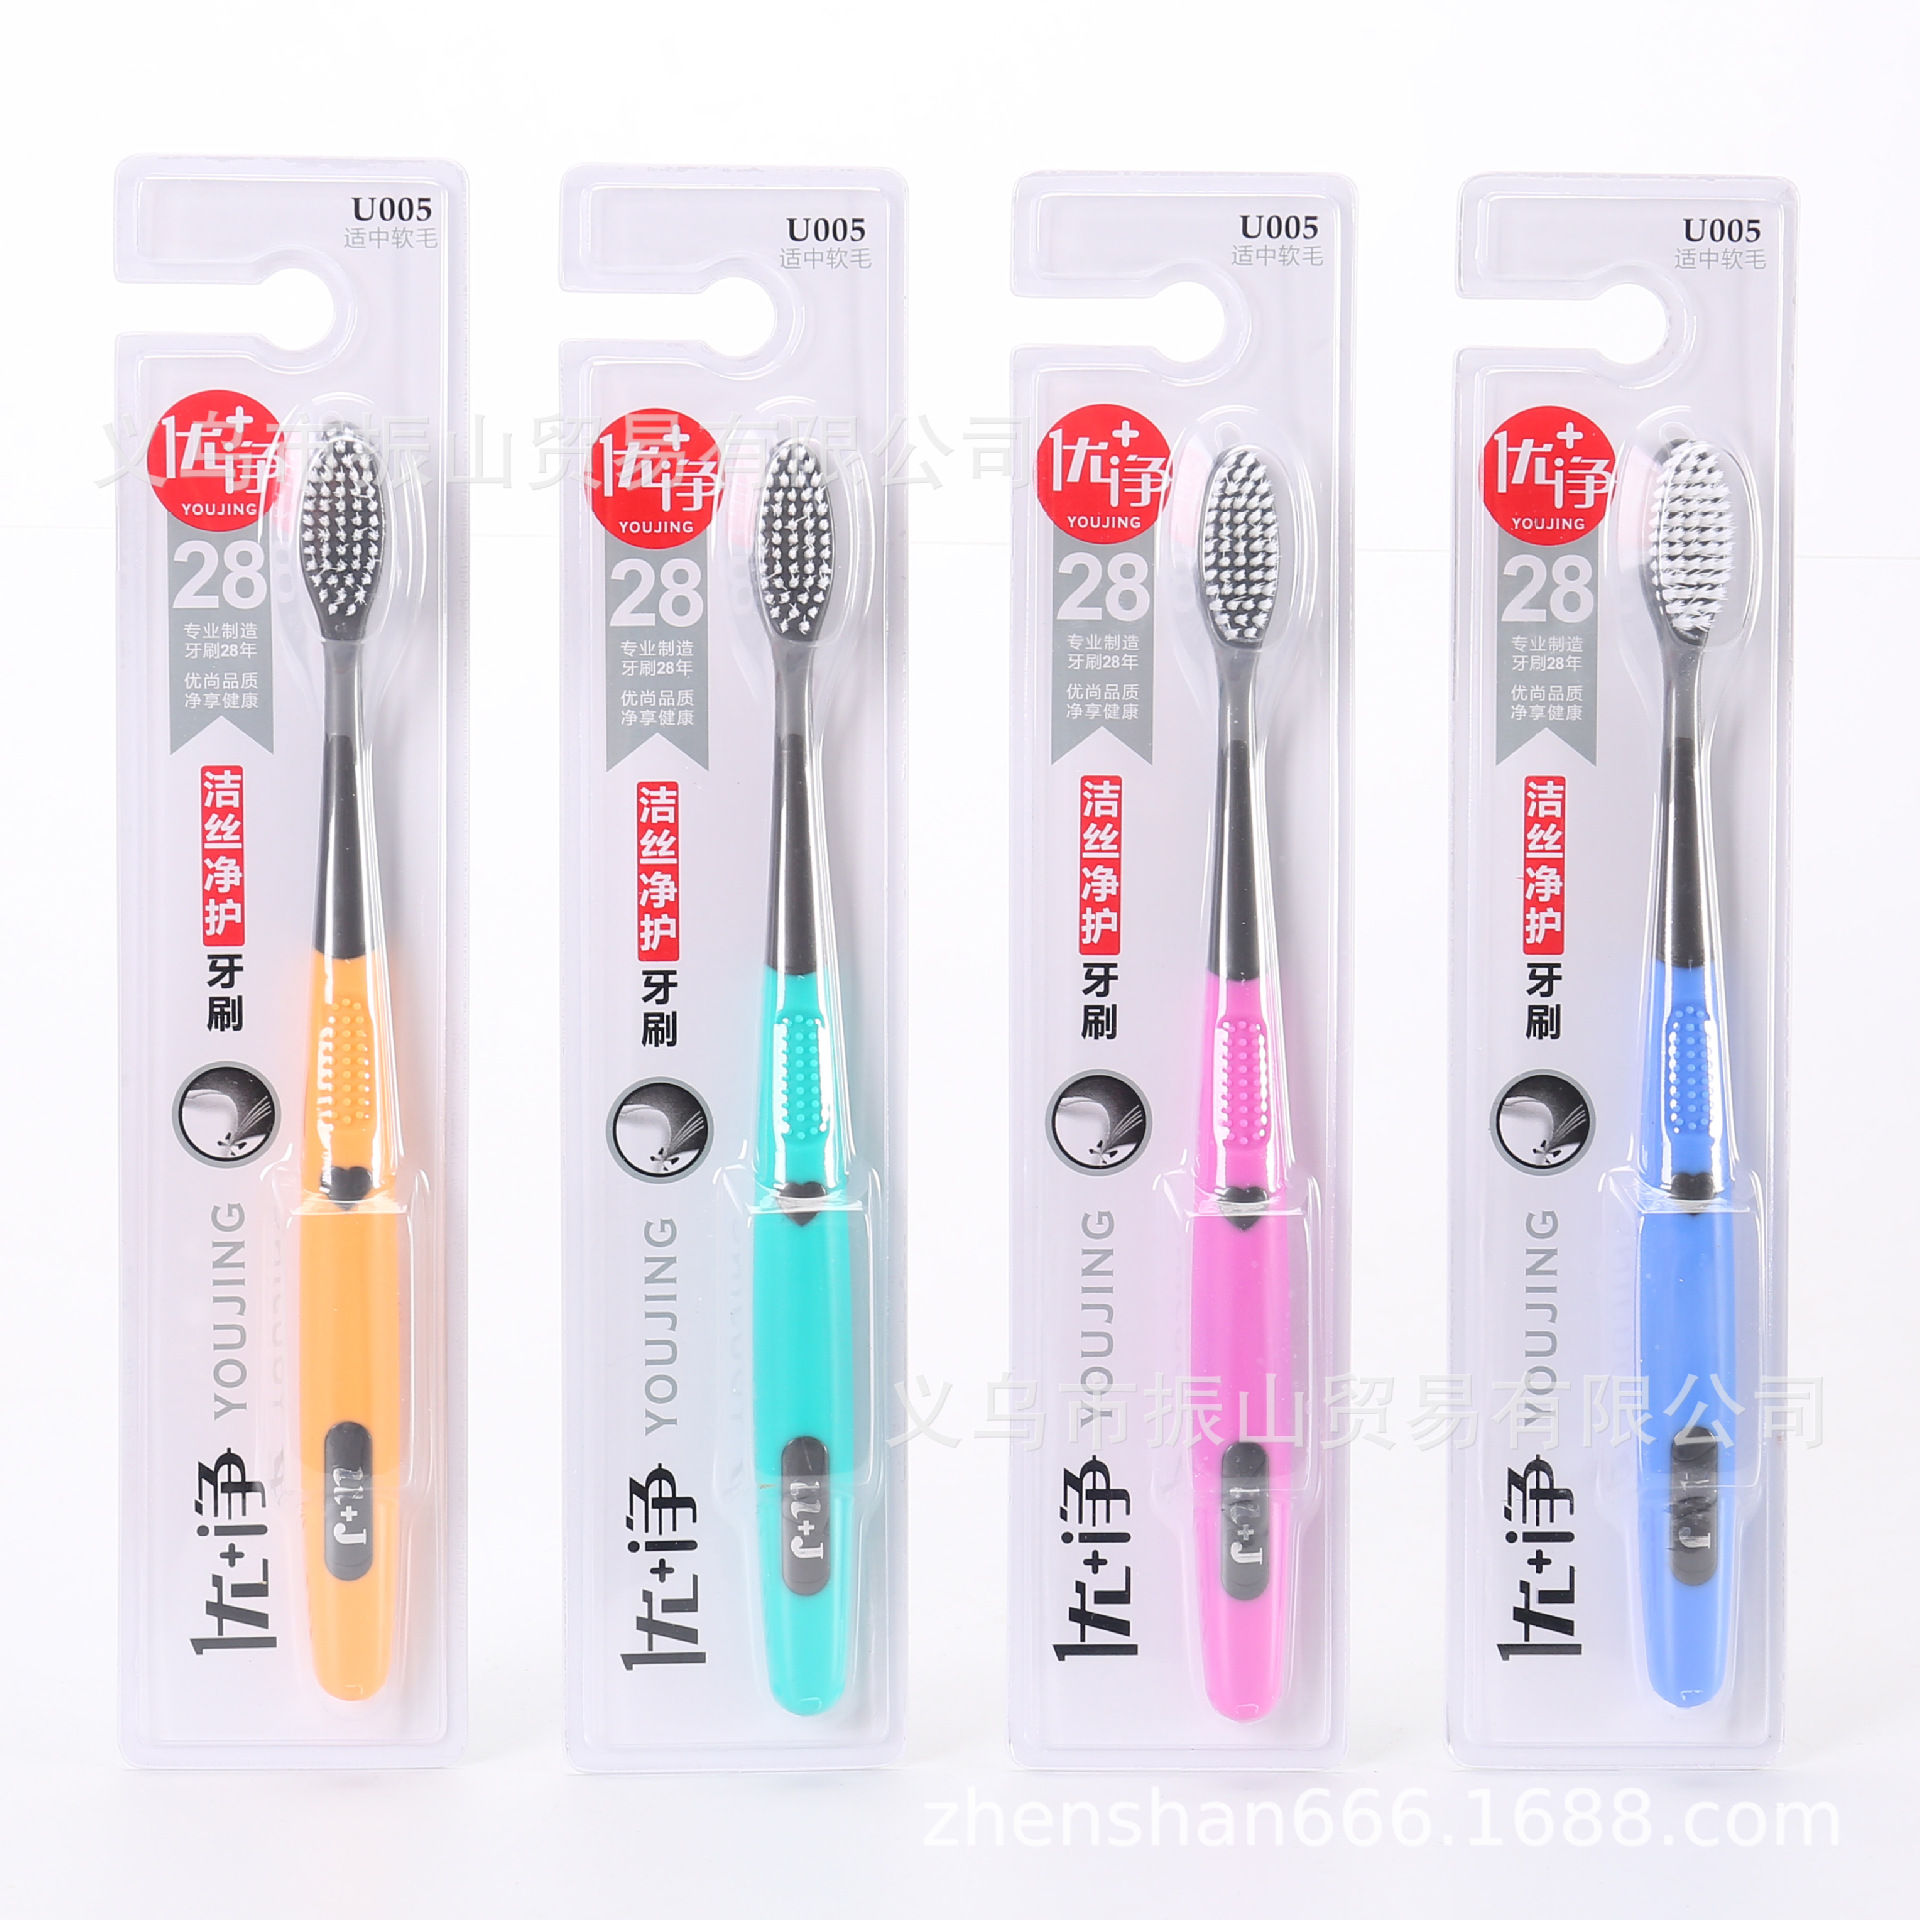 Excellent + Clean U005 50 Pcs/Barrel Guangdong Sanxiao Industrial Product Oval Bruch Head Clean Silk Clean Toothbrush